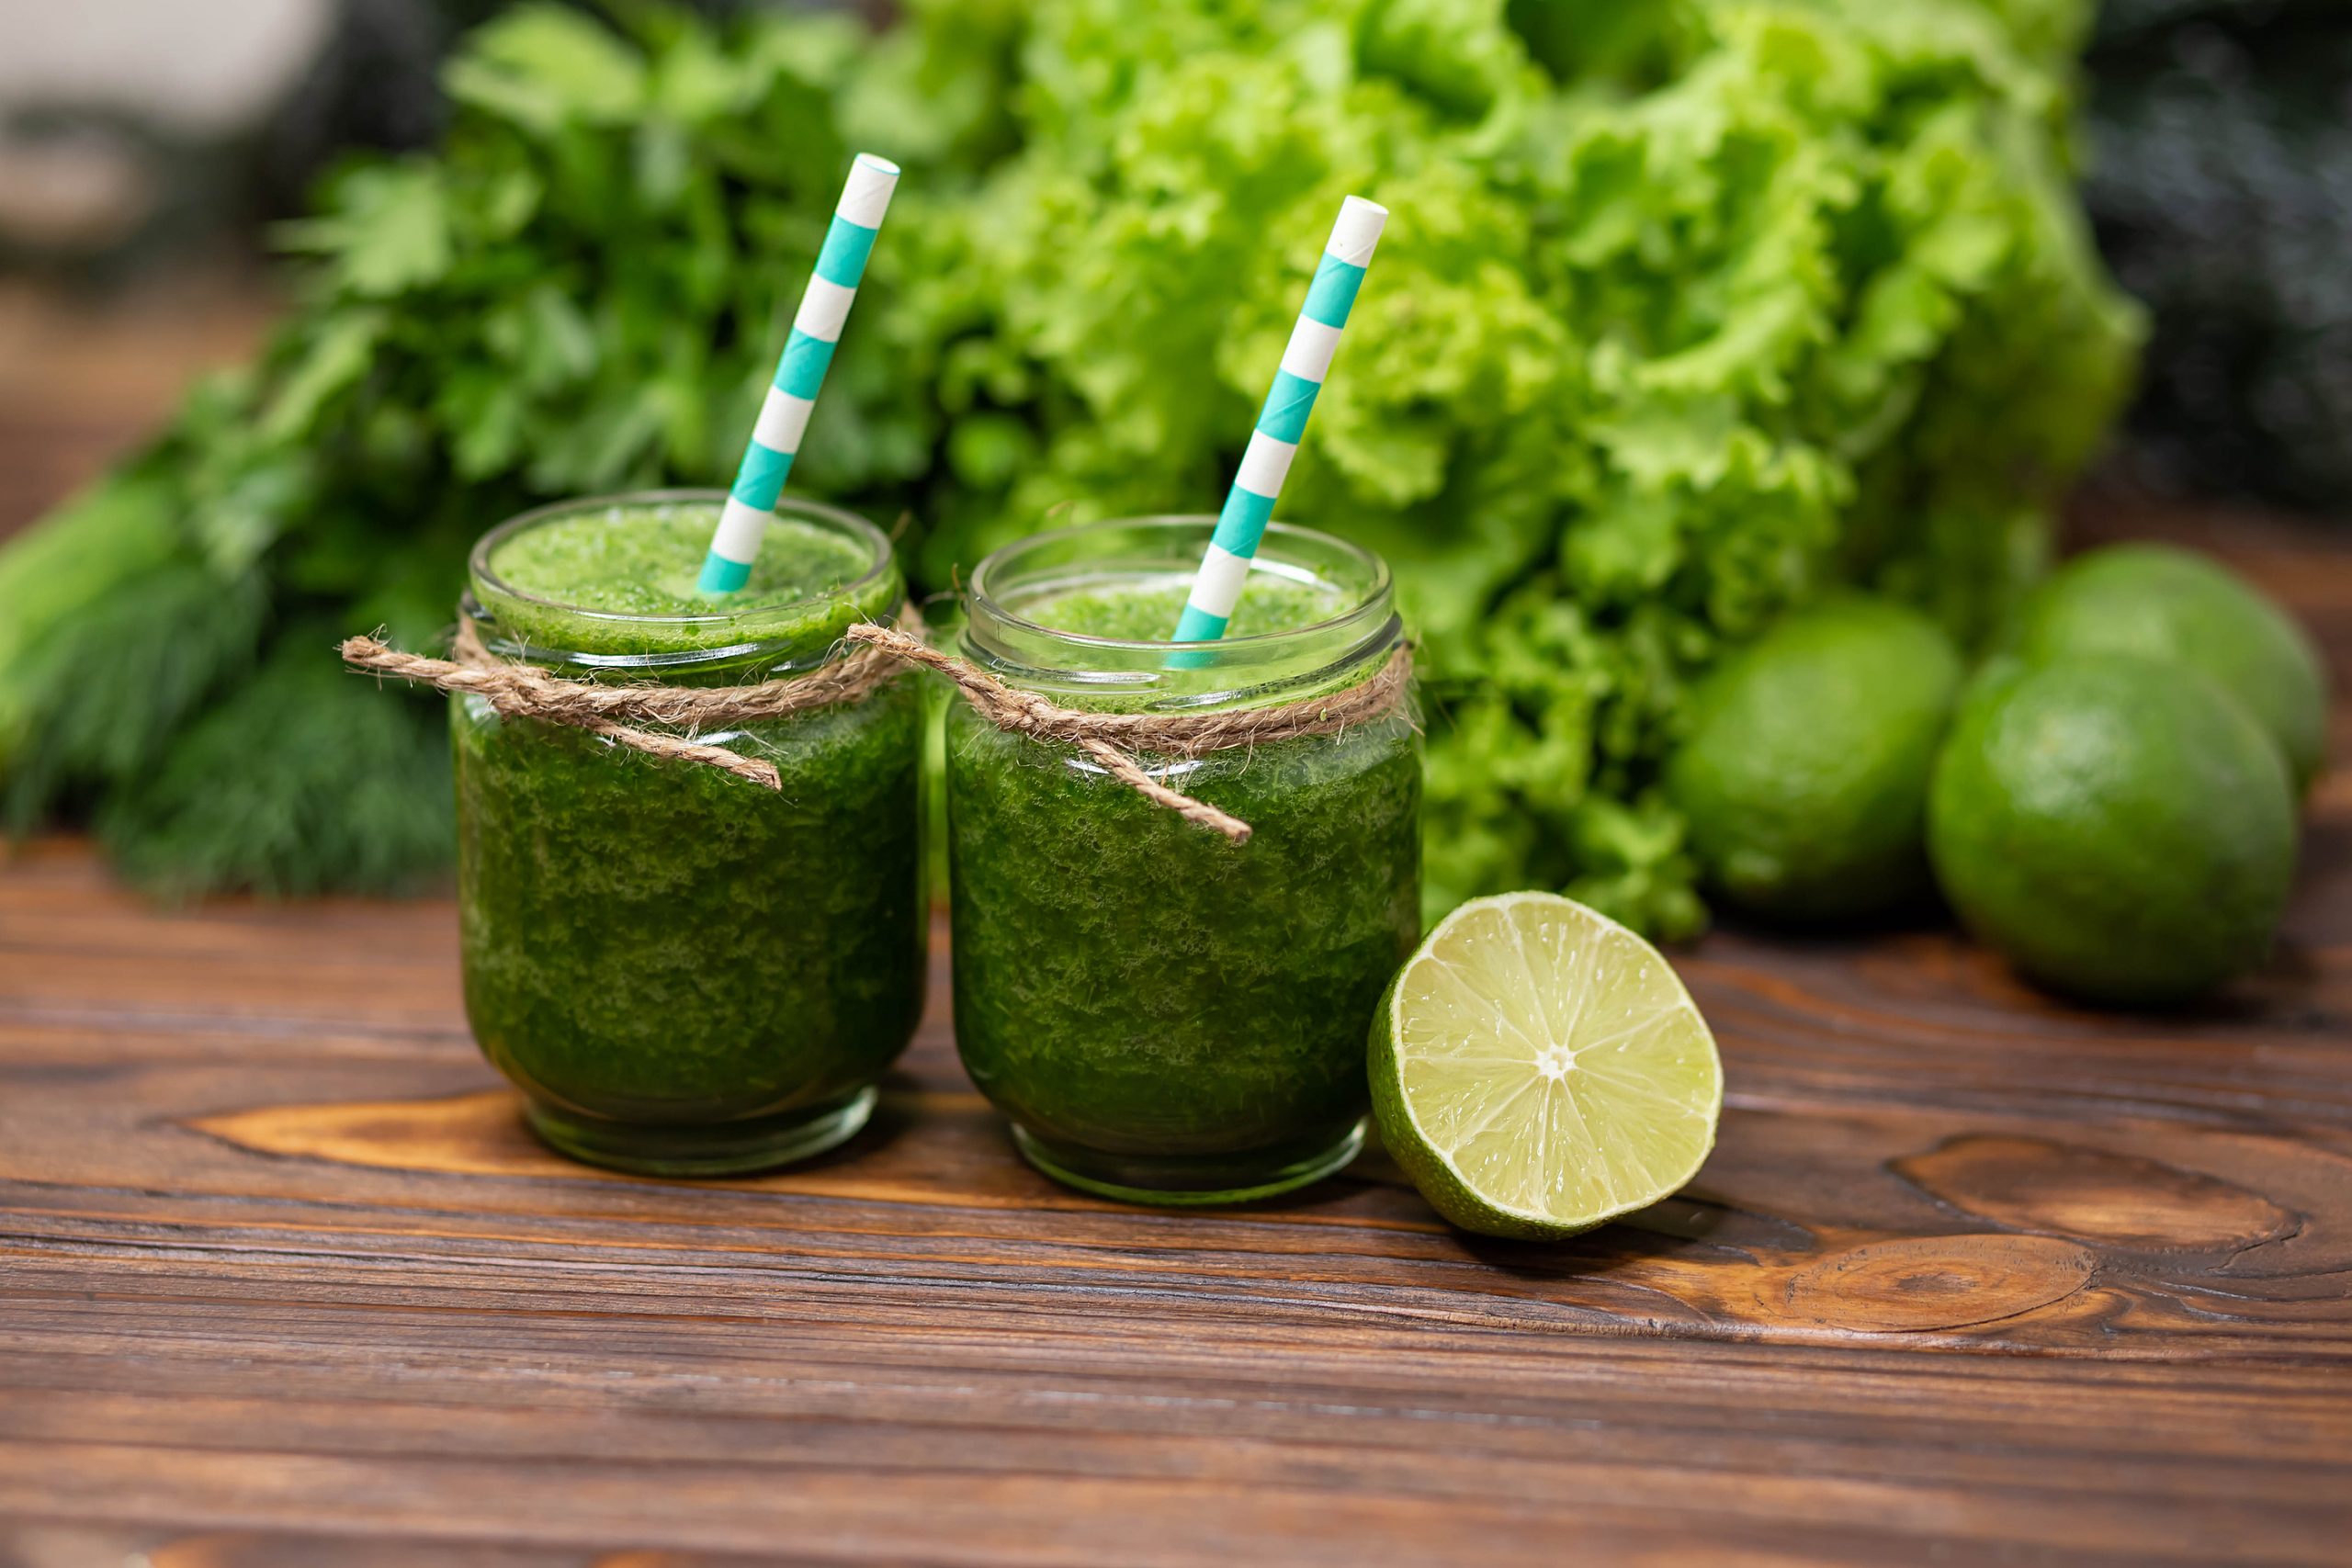 [RECIPE] Enjoy your spirulina in 4 different (and delicious) ways